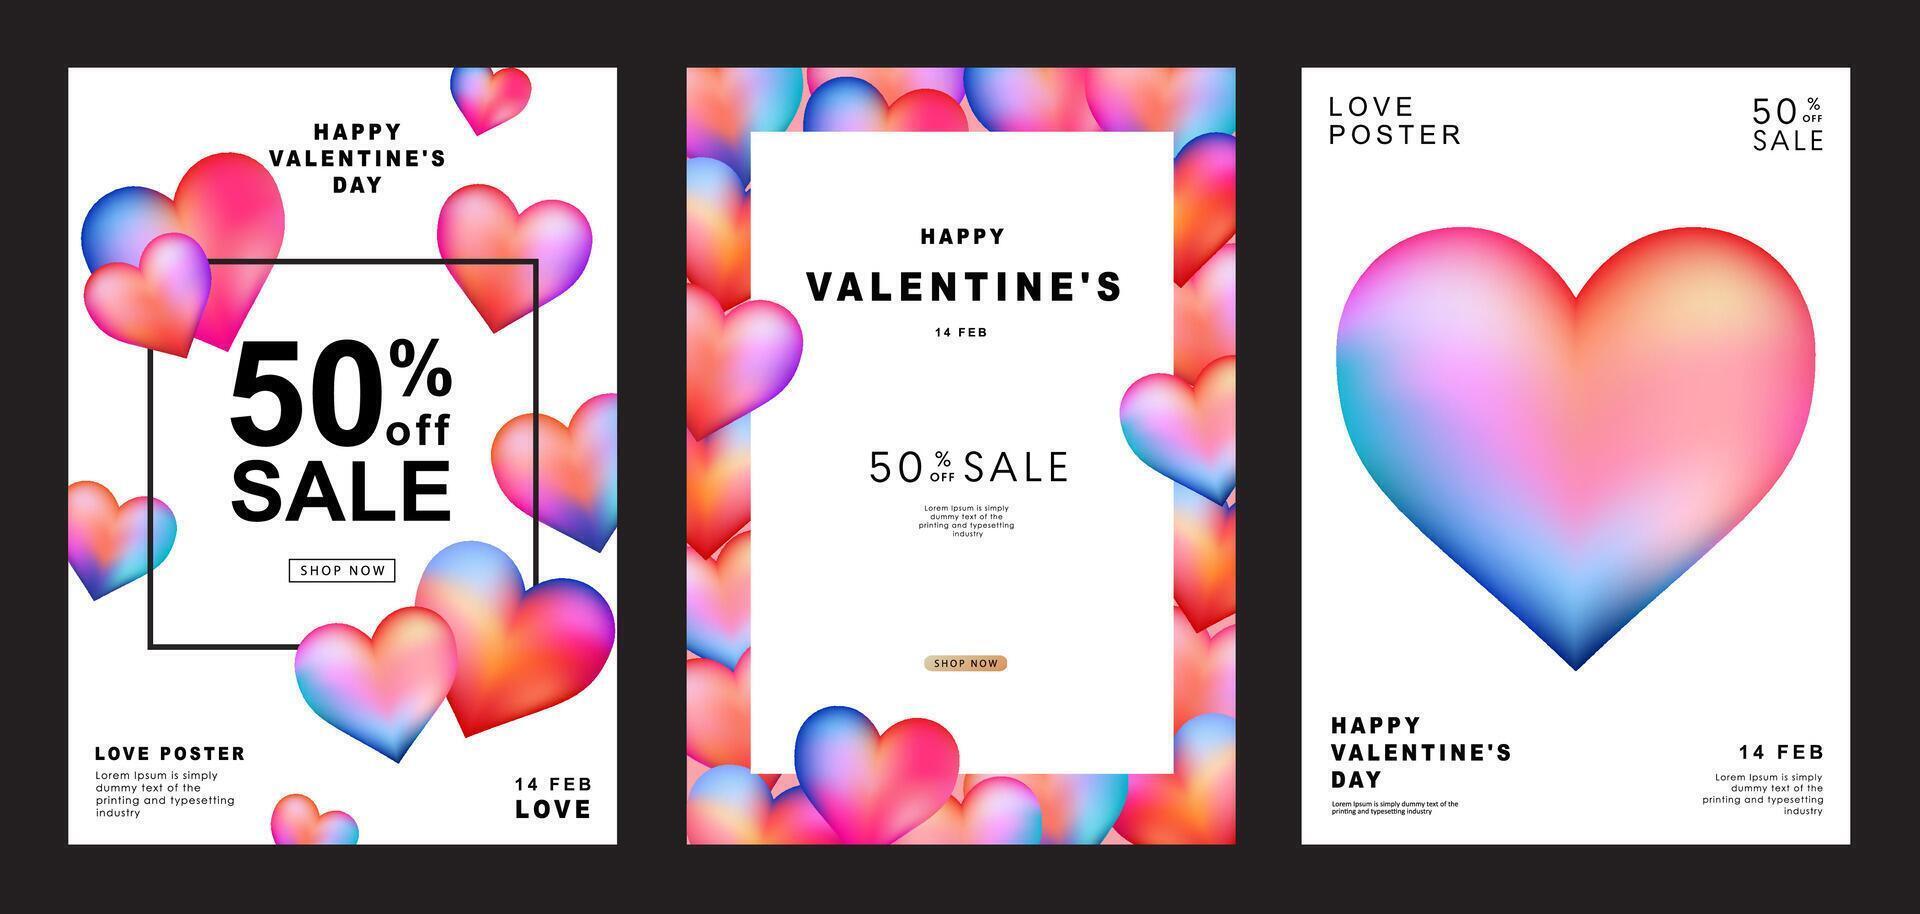 Set of Modern design templates for Valentines day, Love card, banner, poster, cover, invitation. Trendy minimalist aesthetic with gradients and typography, y2k backgrounds. vector illustration.